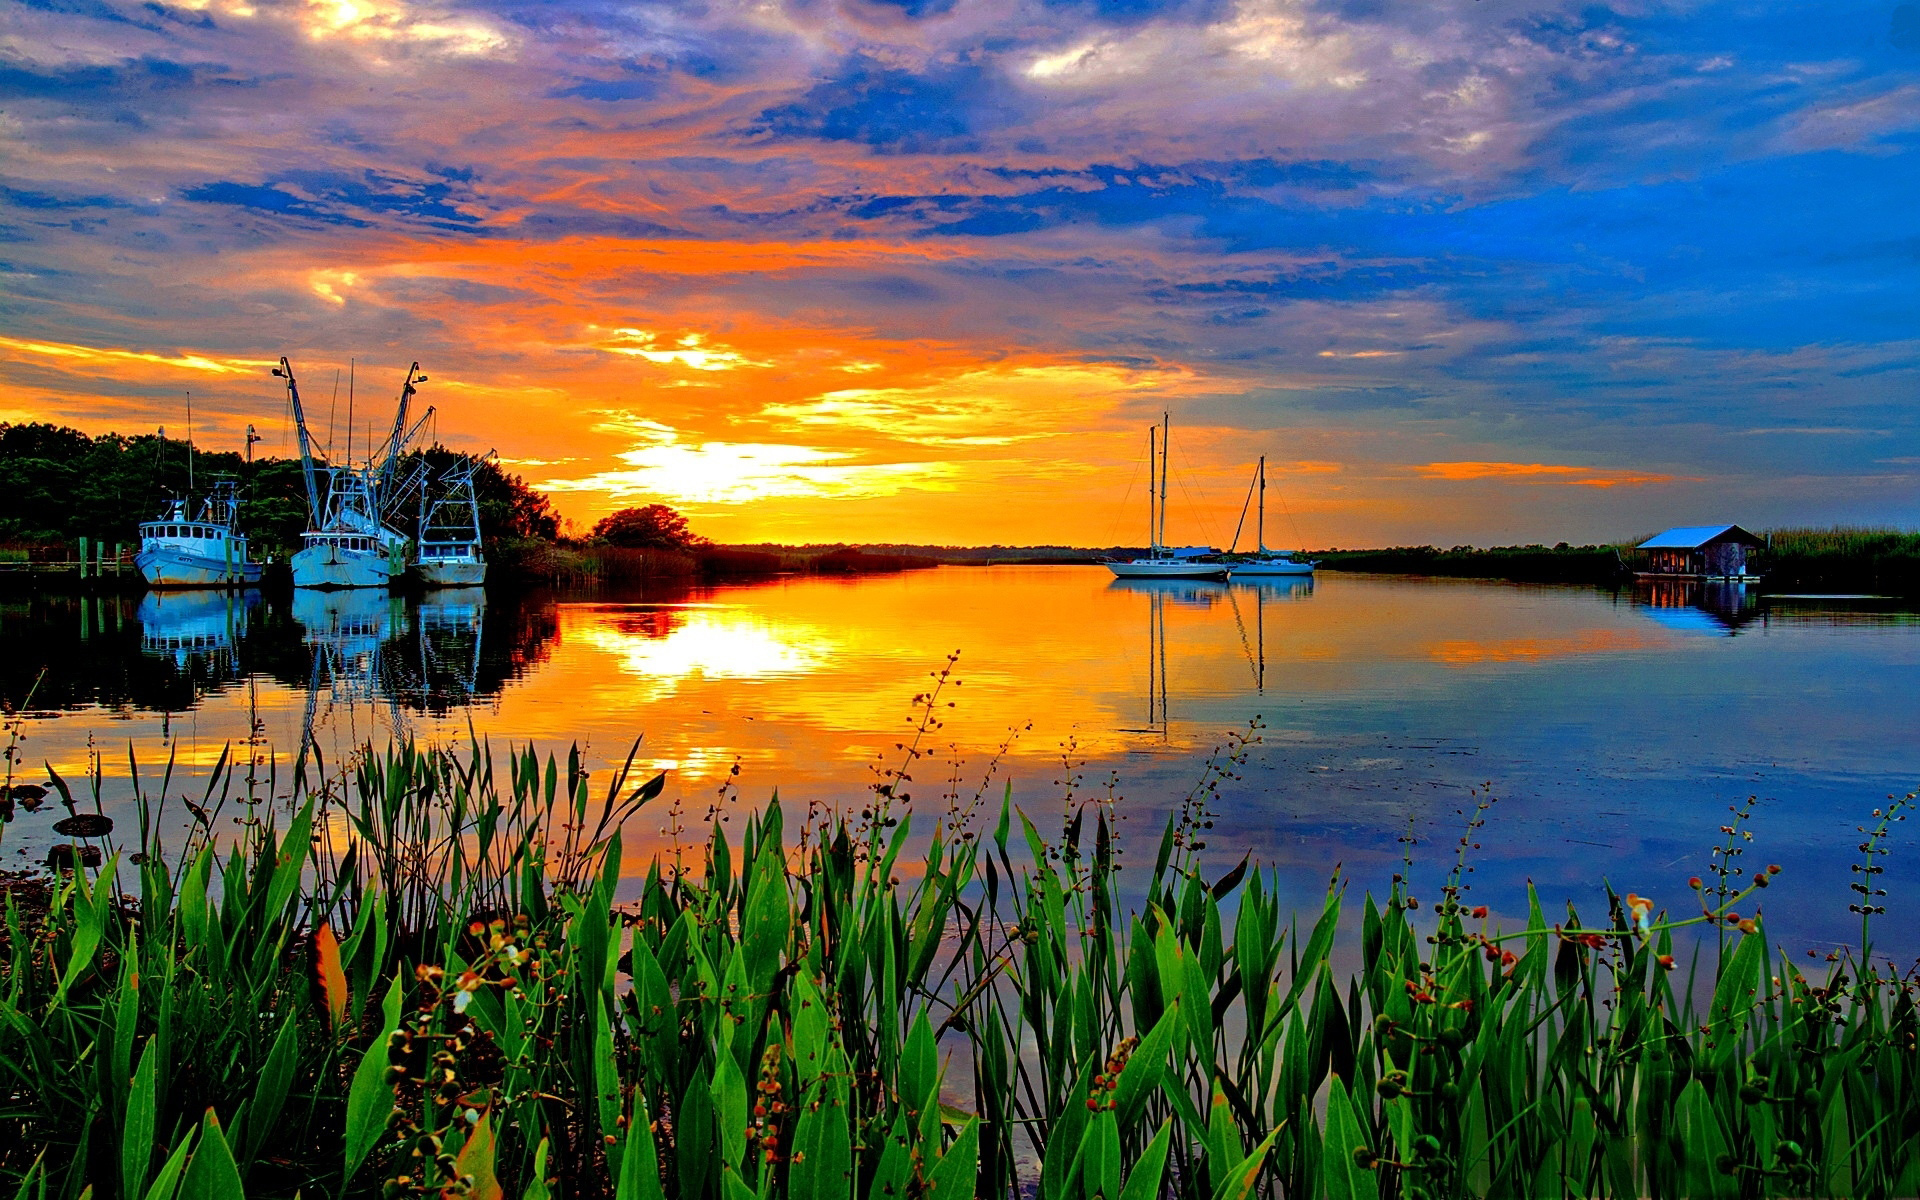 Sunset Over The Horizon Lake Grass Anchored Ships A Wooden ...
